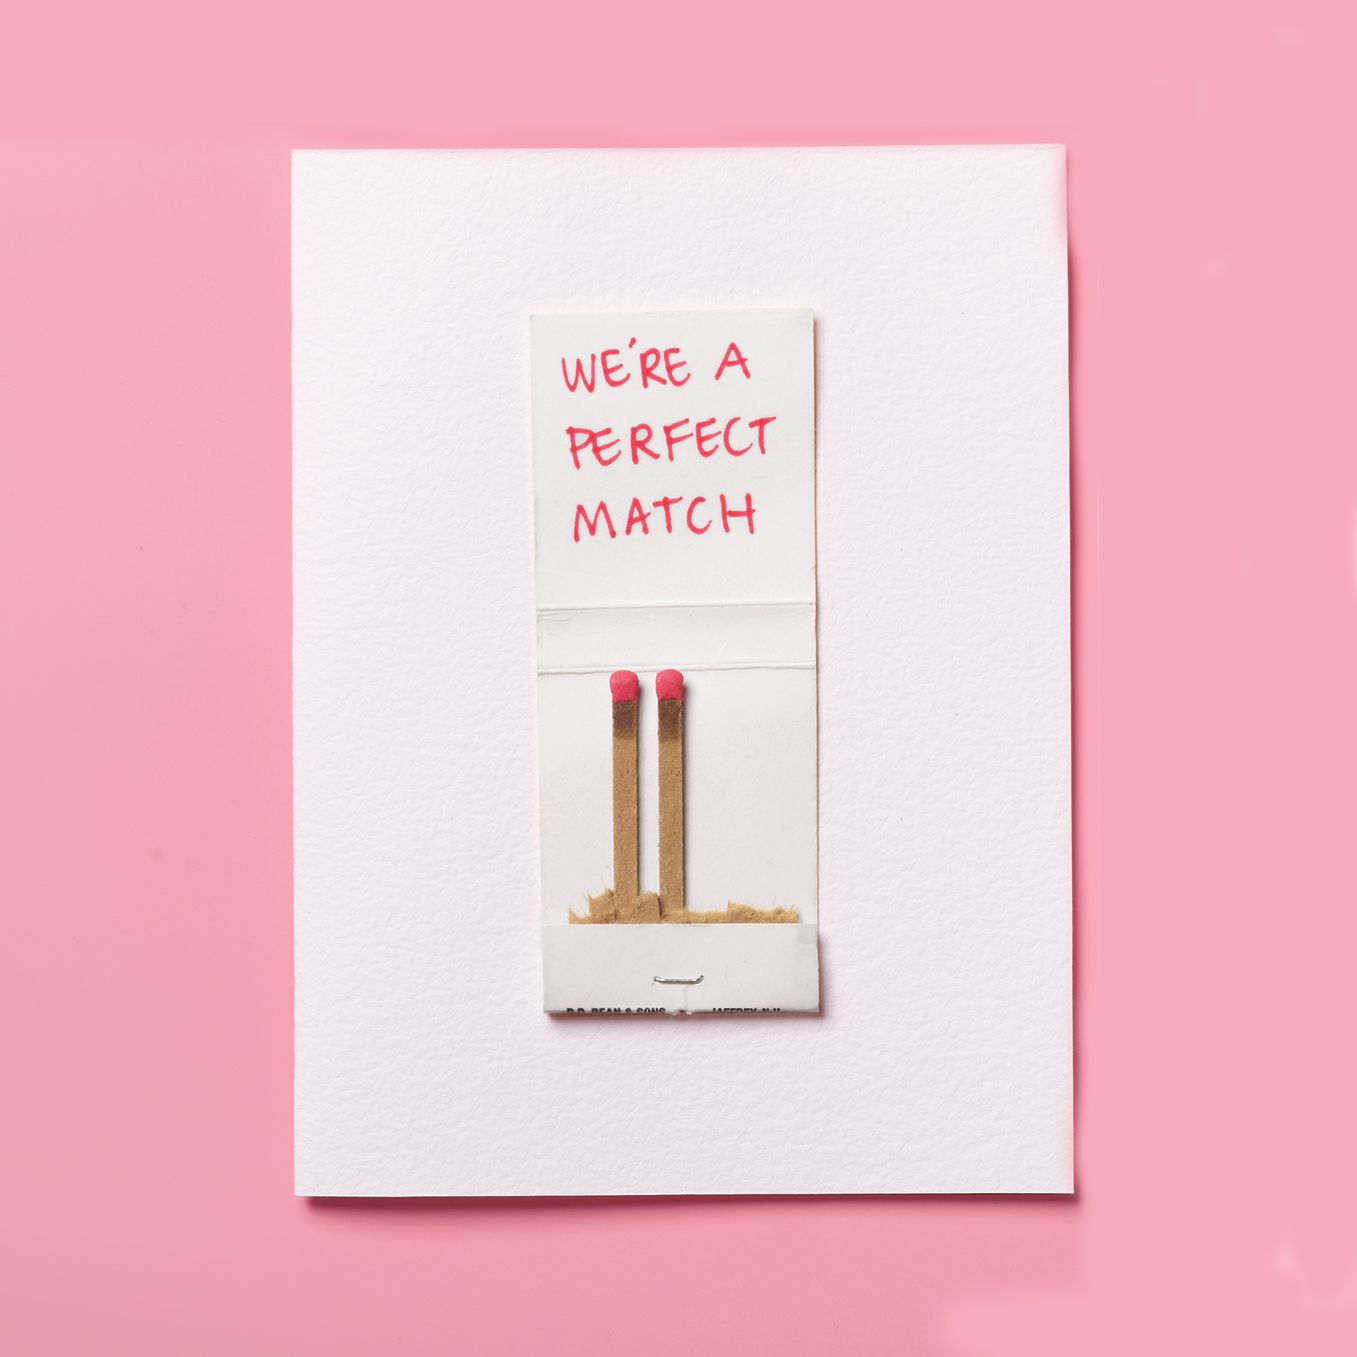 Valentine's Day Cards, matchbook with "we're a perfect match"